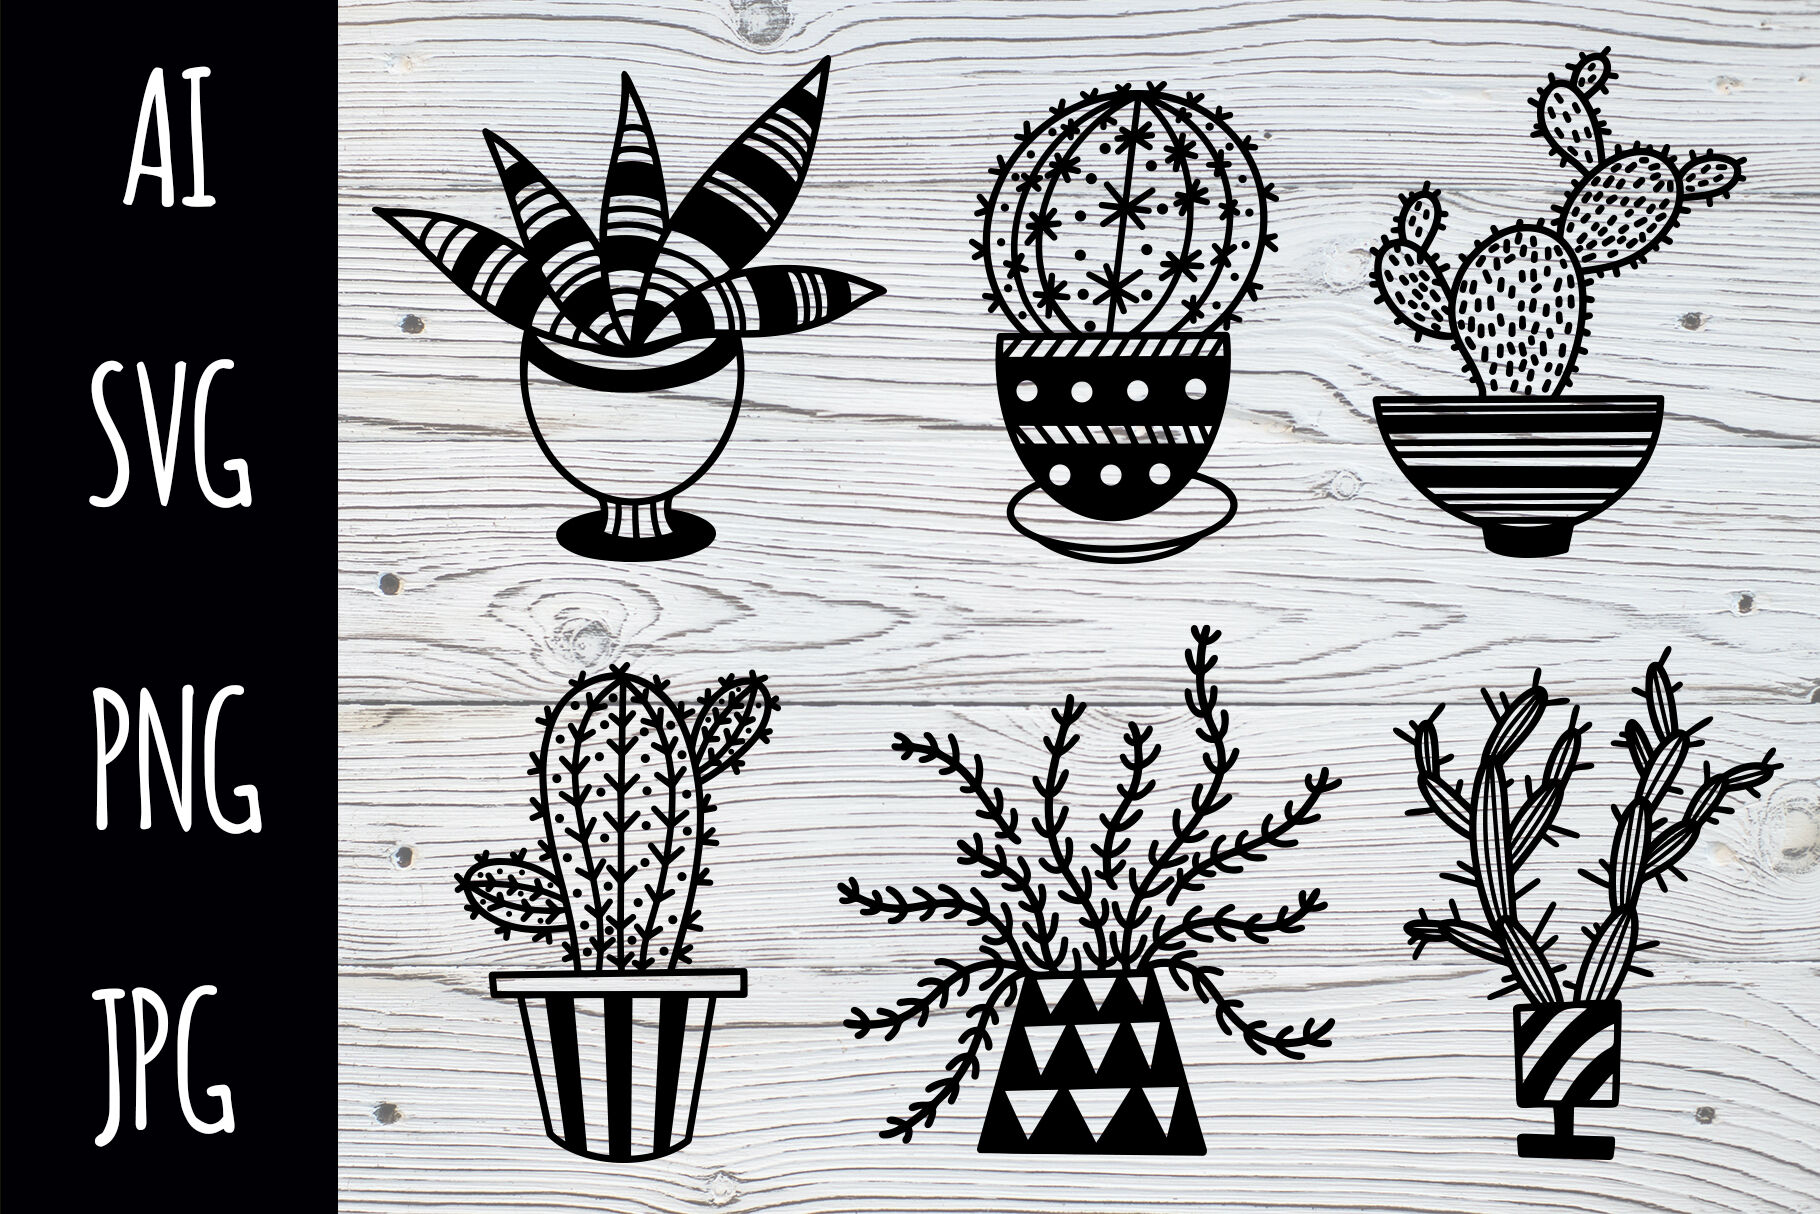 Hand Drawn Colorful Multiple Cactus Pot PNG & SVG Design For T-Shirts